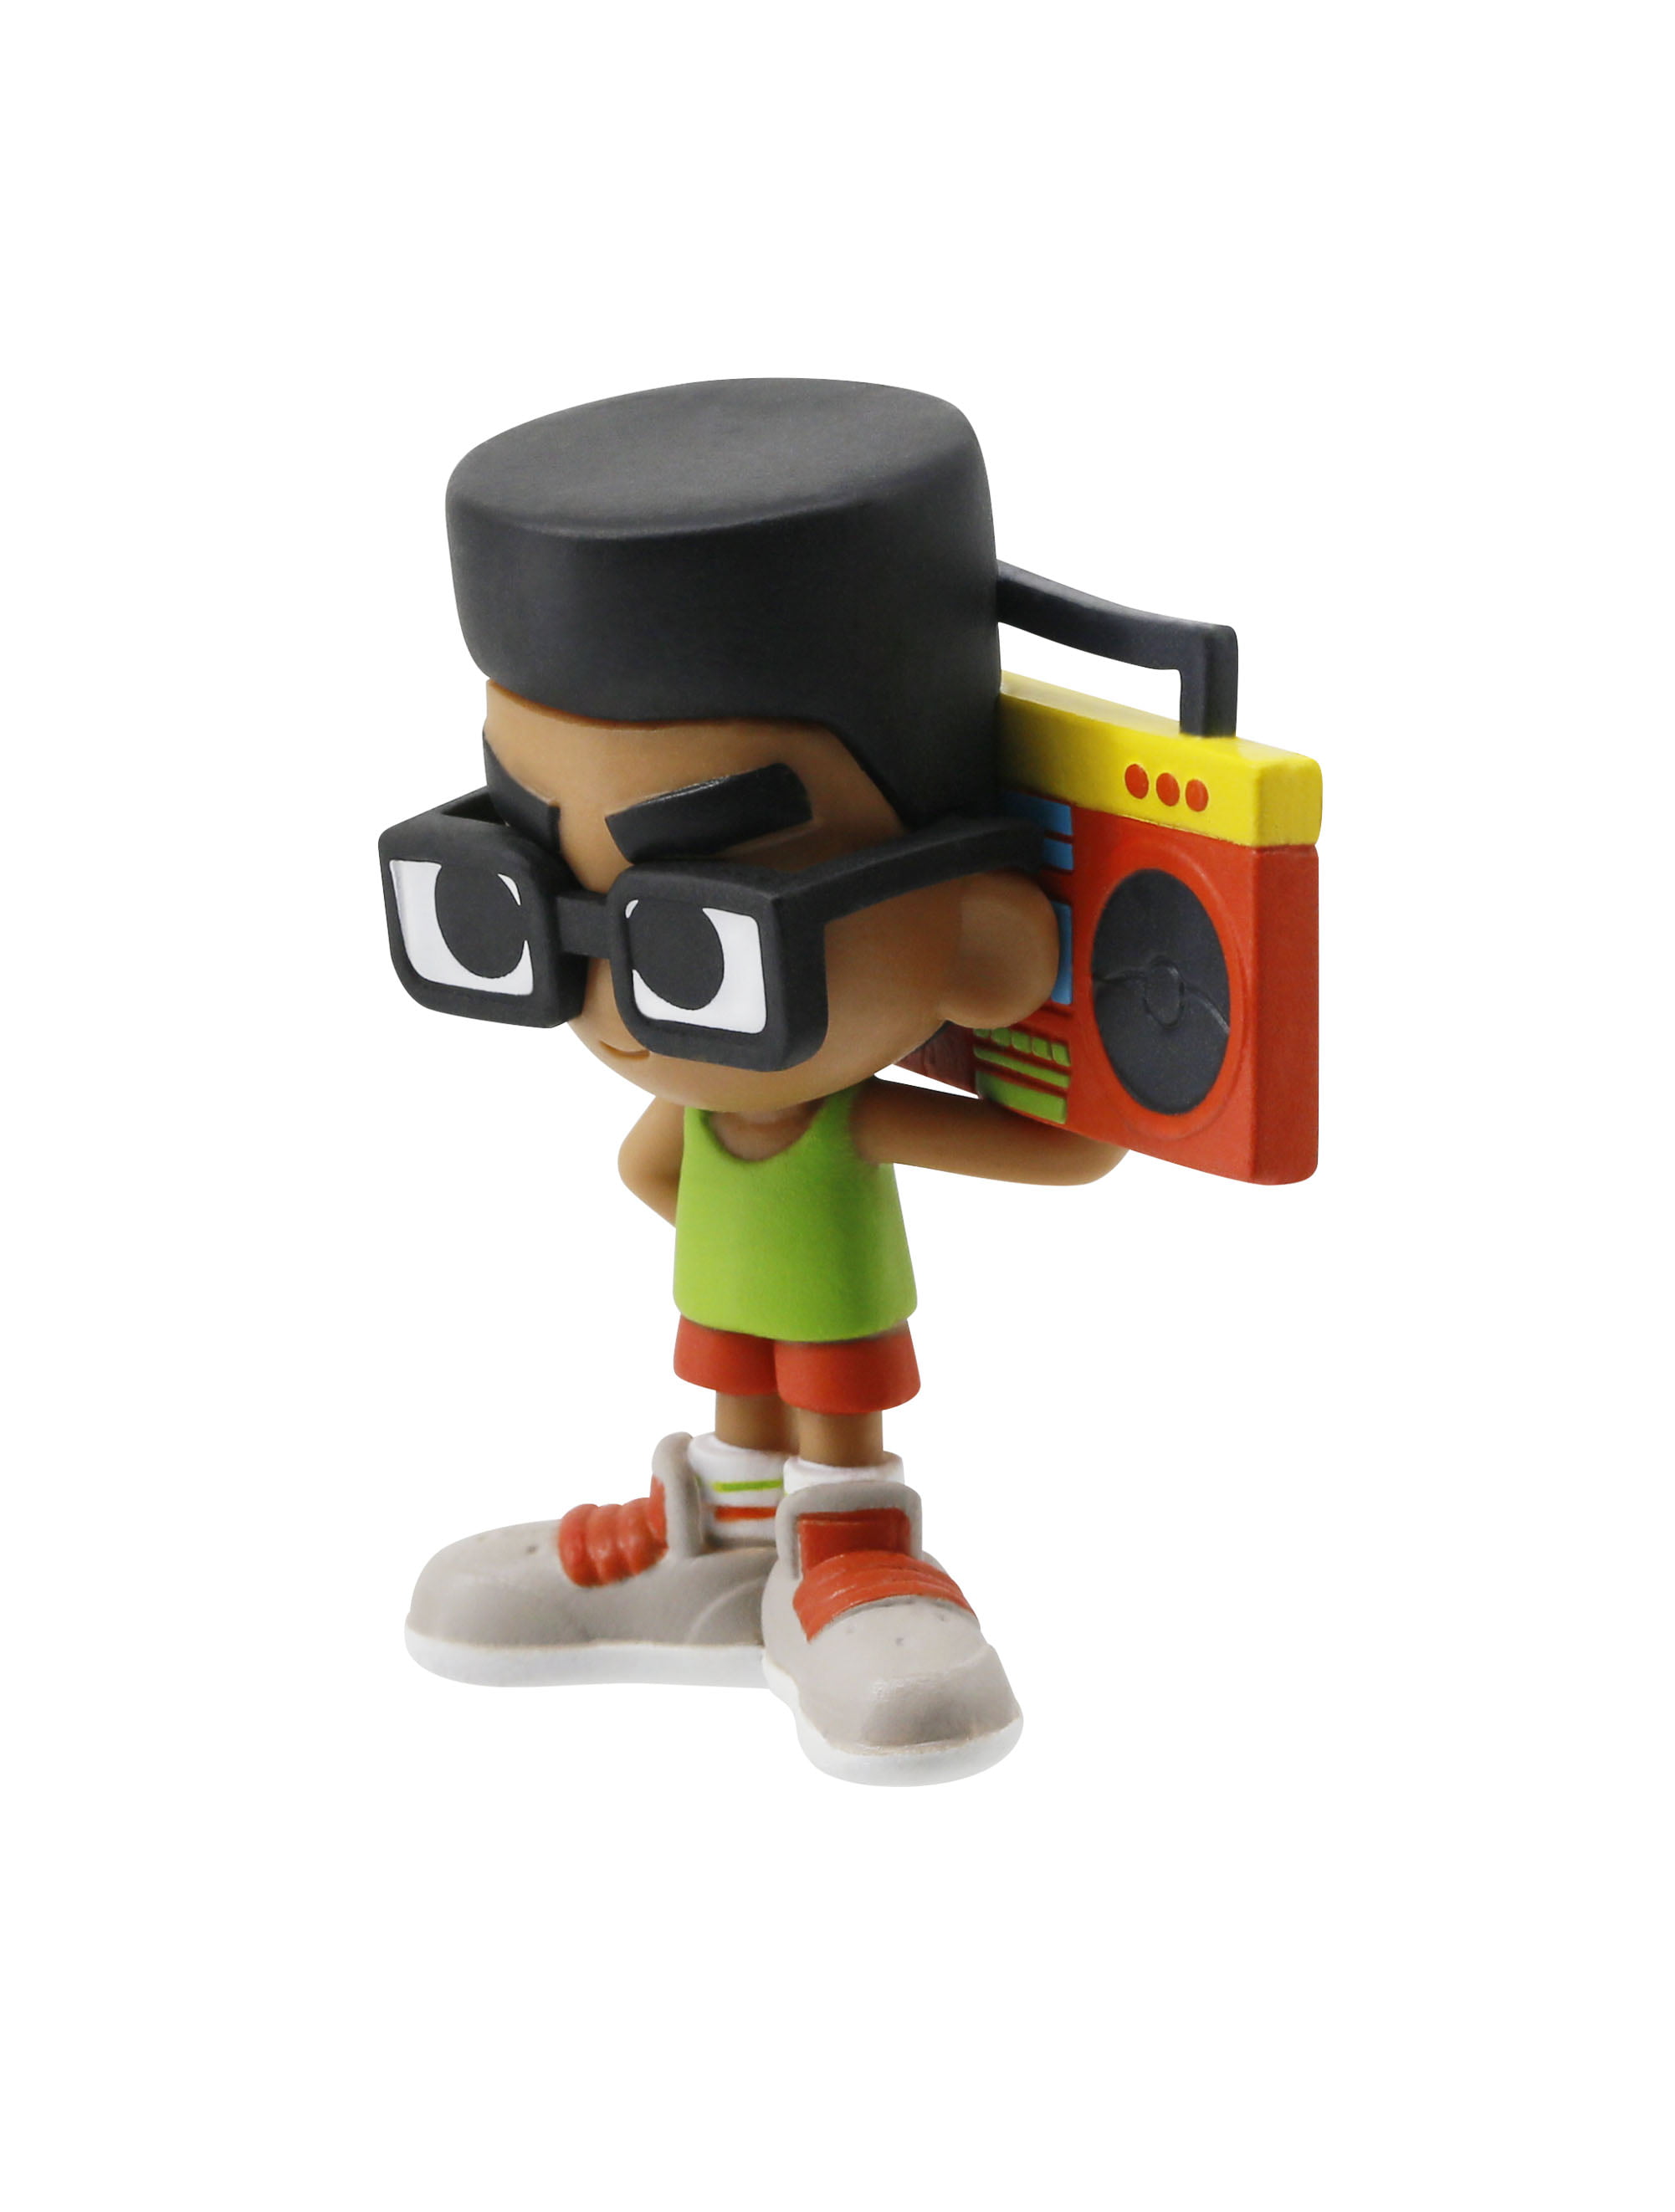 Jake Frank and Plush Toys NWT Qty Discount Details about   Subway Surfers 4" Figurines Tricky